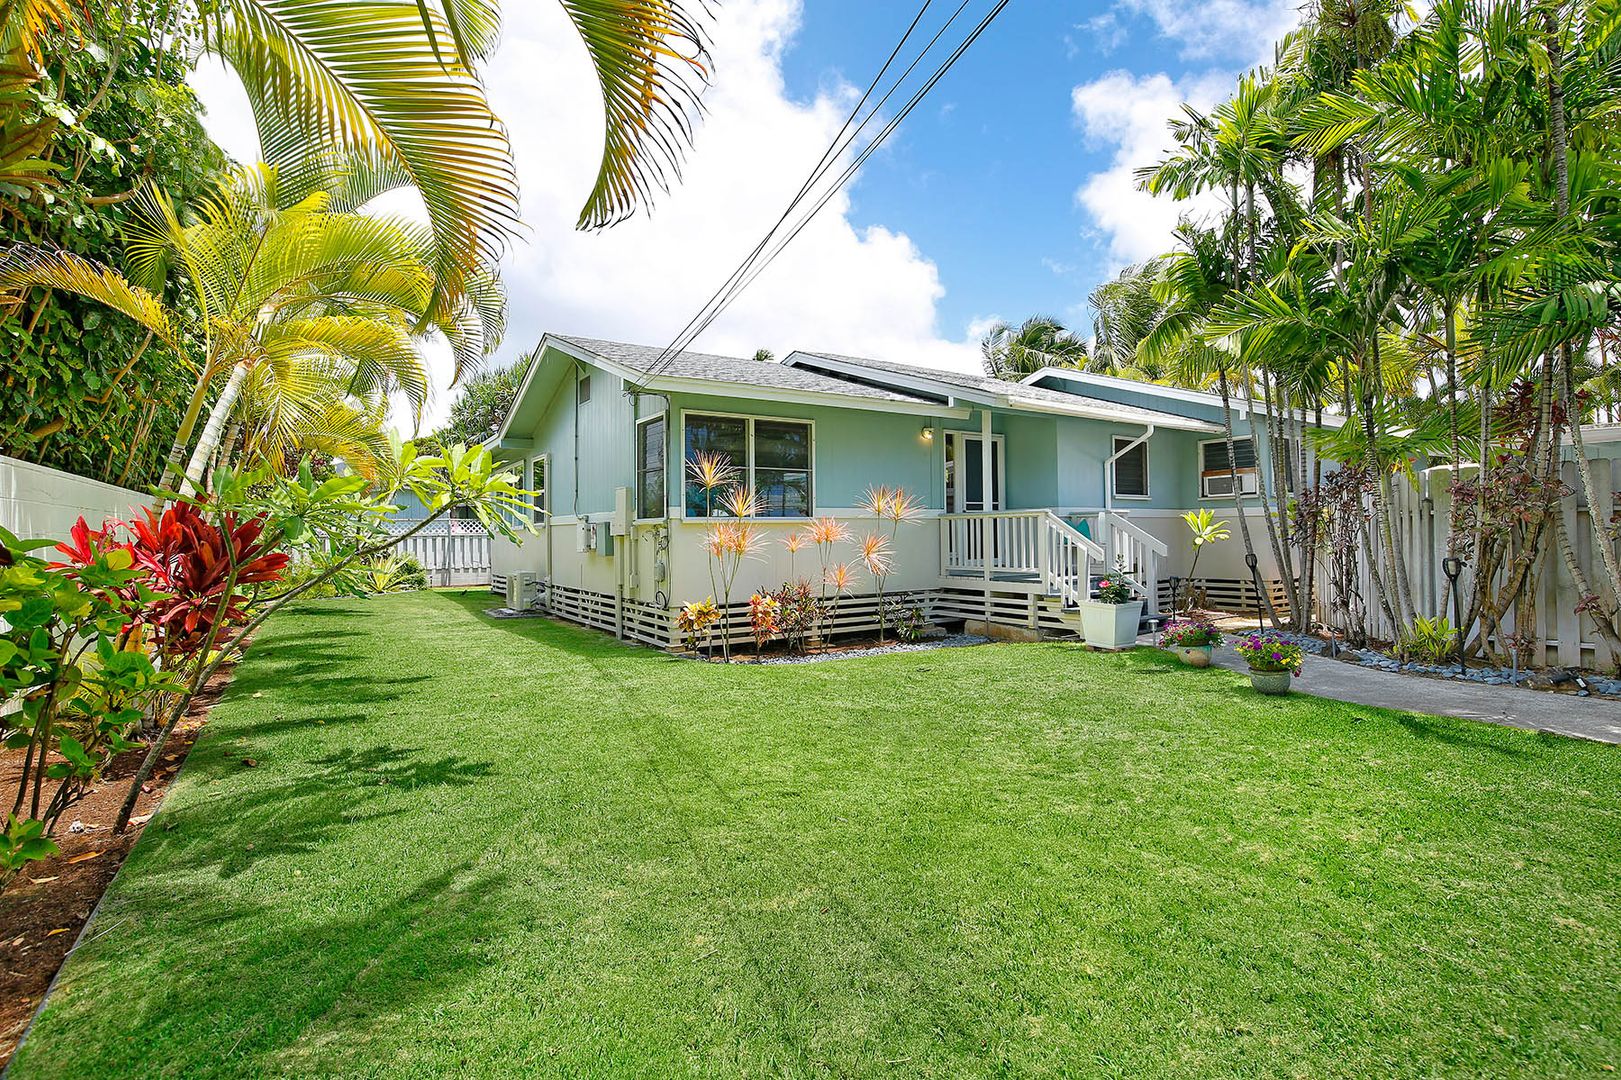 3 Bedroom, 3 Bath Single Family Home with Fenced Yard and Walking Distance to Kailua Beach